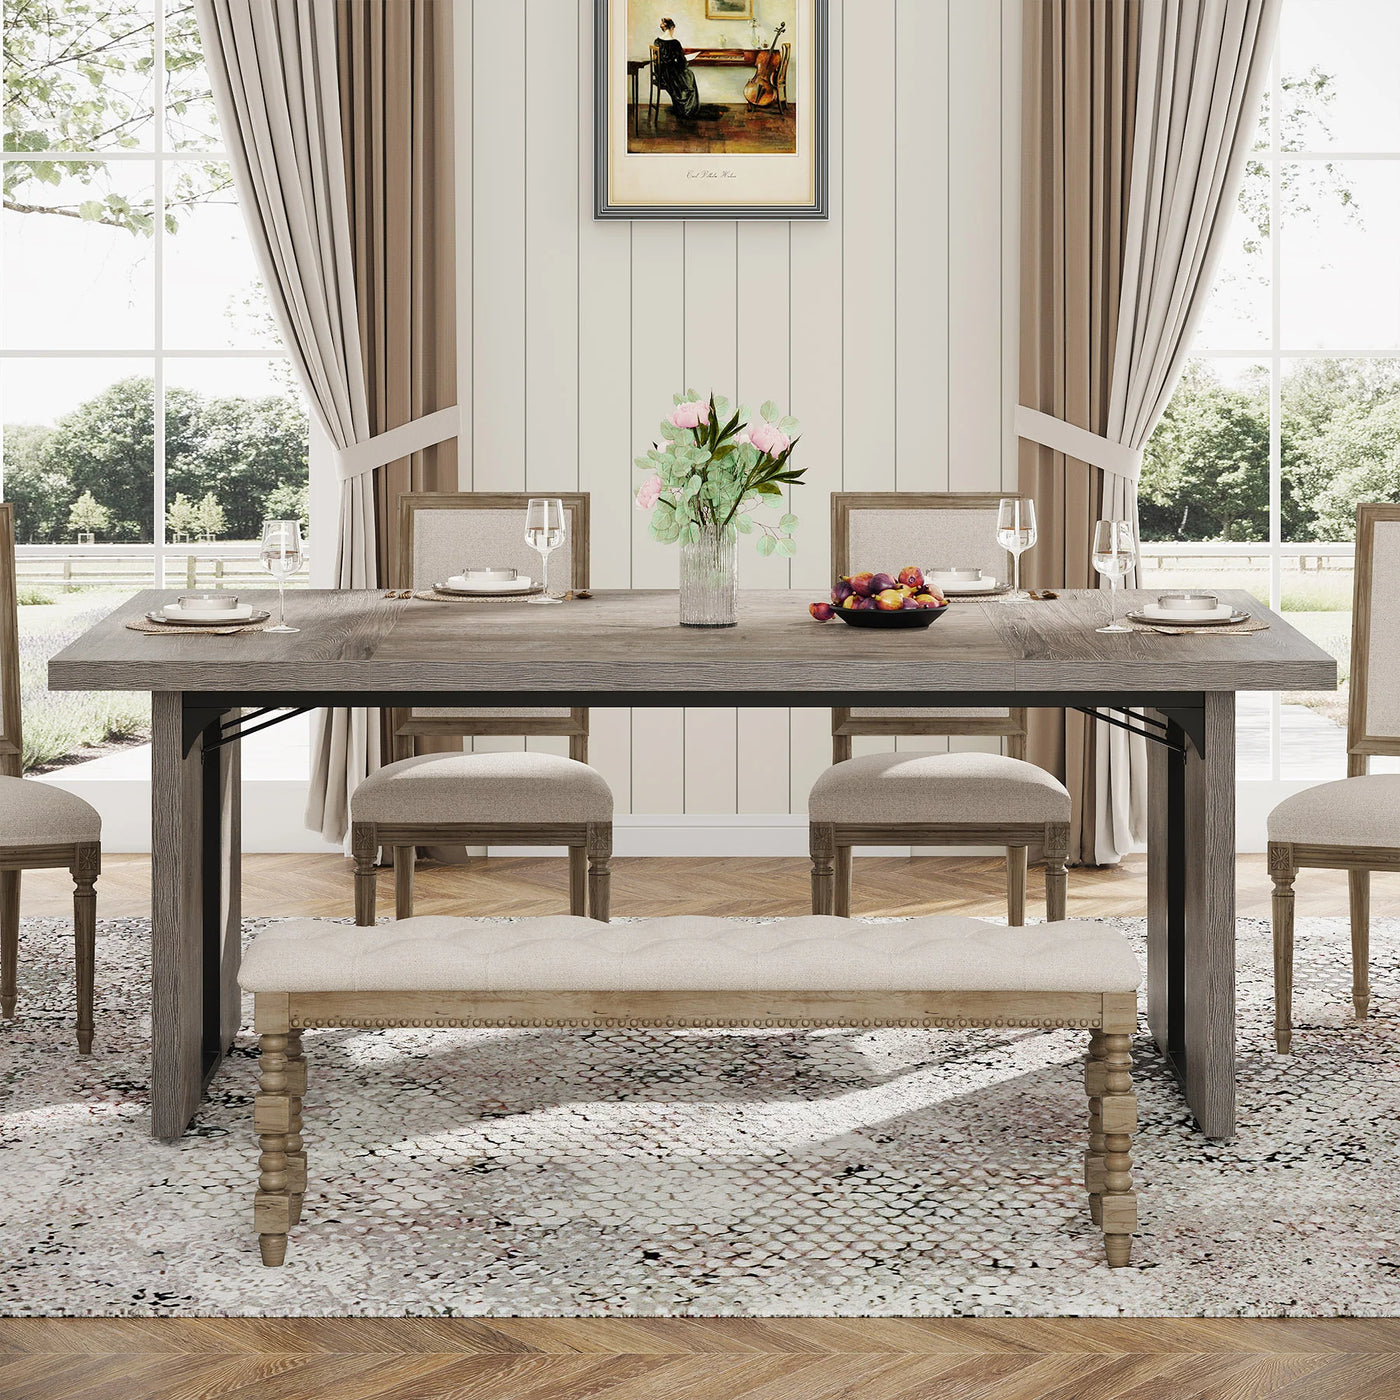 Parkville Rectangular Dining Table | Farmhouse Wooden Breakfast Table for 6 to 8 People